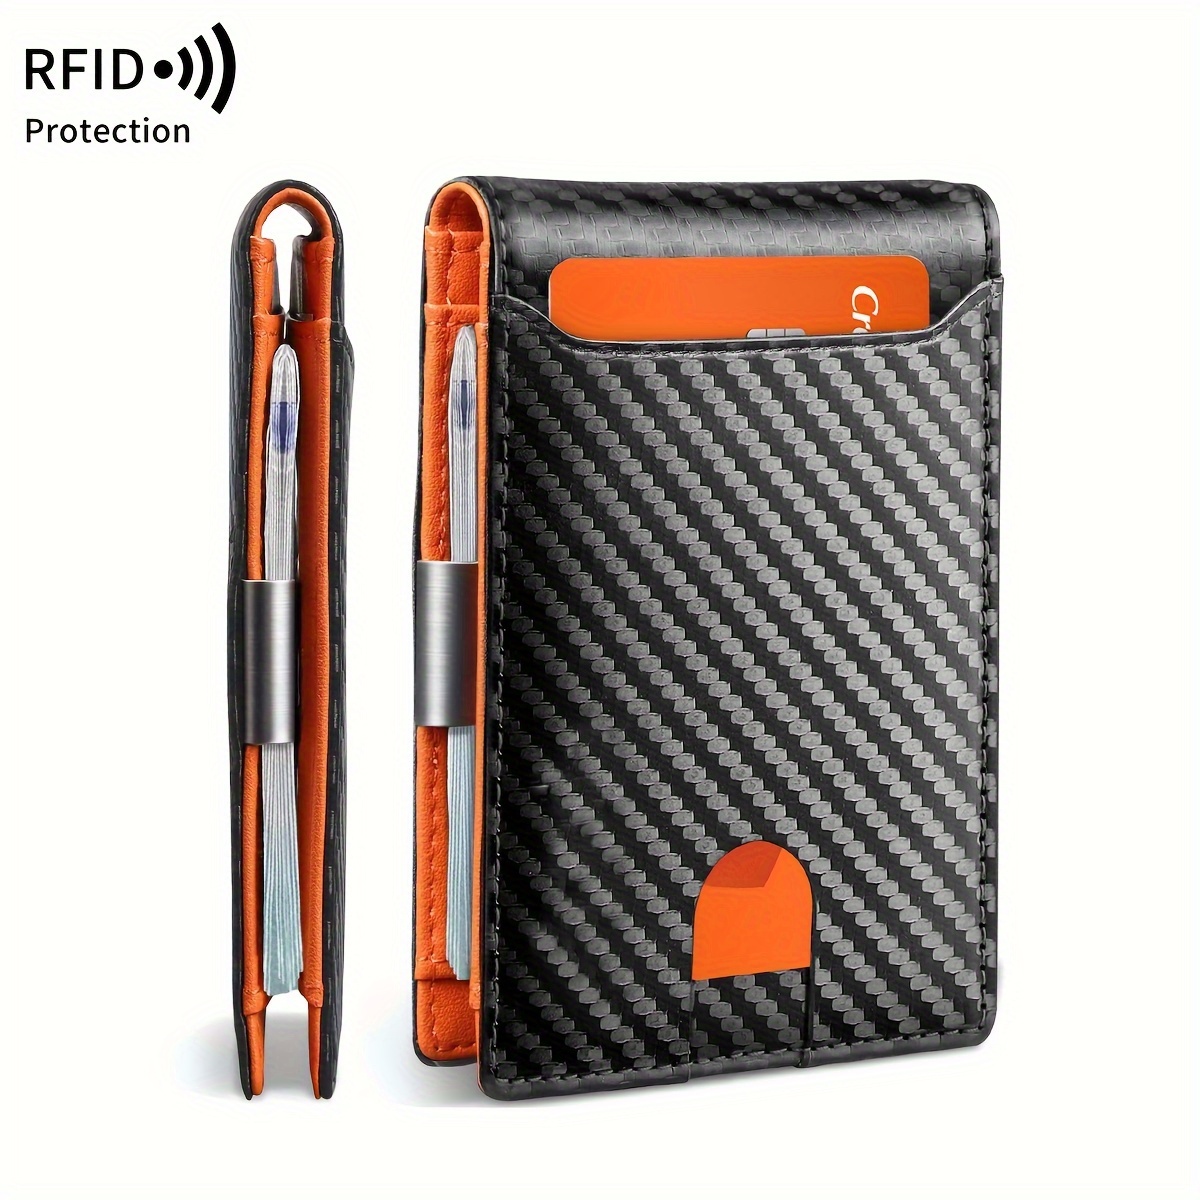 

Rfid Blocking Wallet, Simple Multifunctional Slim Bifold Credit Card Holder, Portable Front Pocket Men's Wallet With Money Clip And Credit Card Slots, Ideal Gift For Men